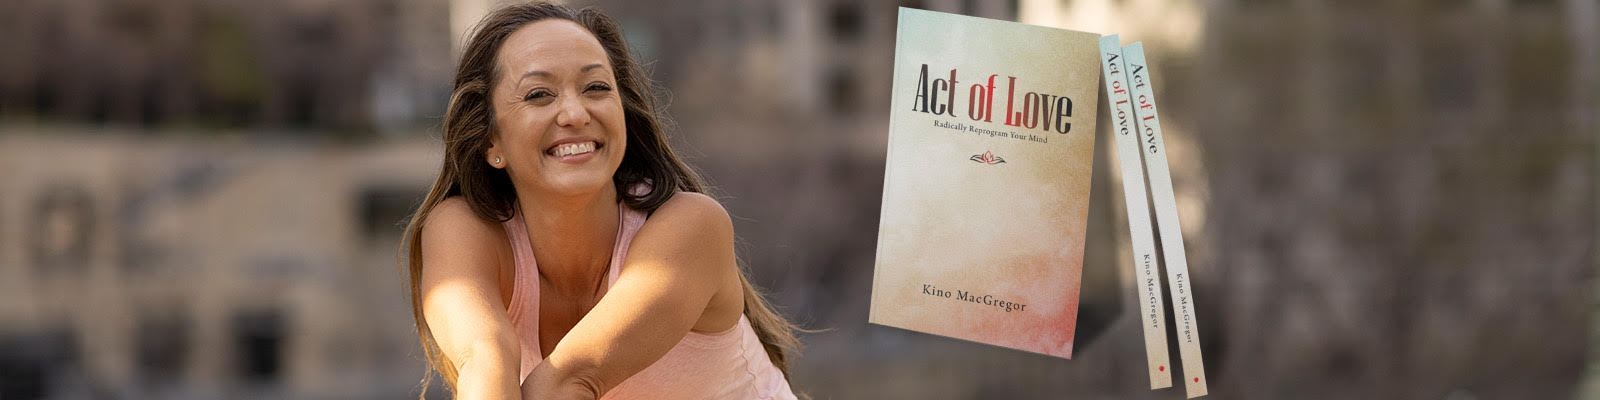 Act of Love - Buy The Book